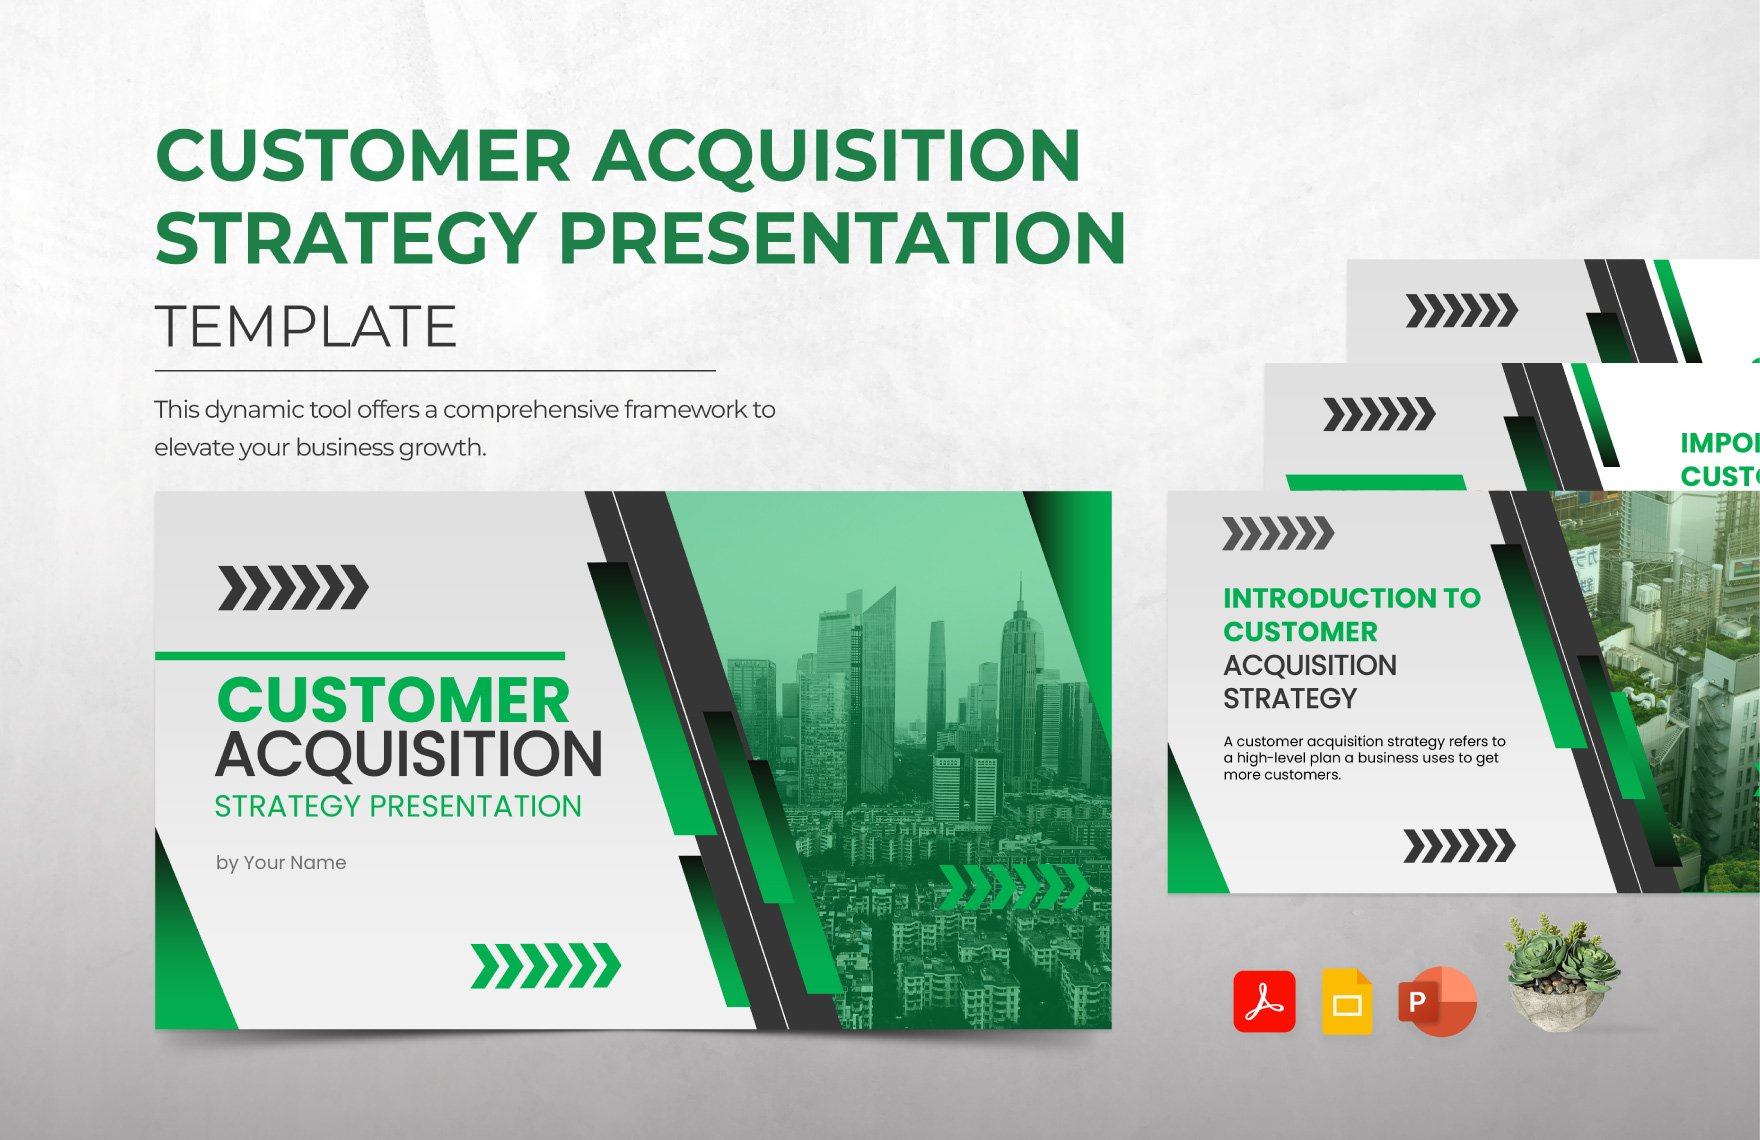 Free Customer Acquisition Strategy Presentation Template in PDF, PowerPoint, Google Slides